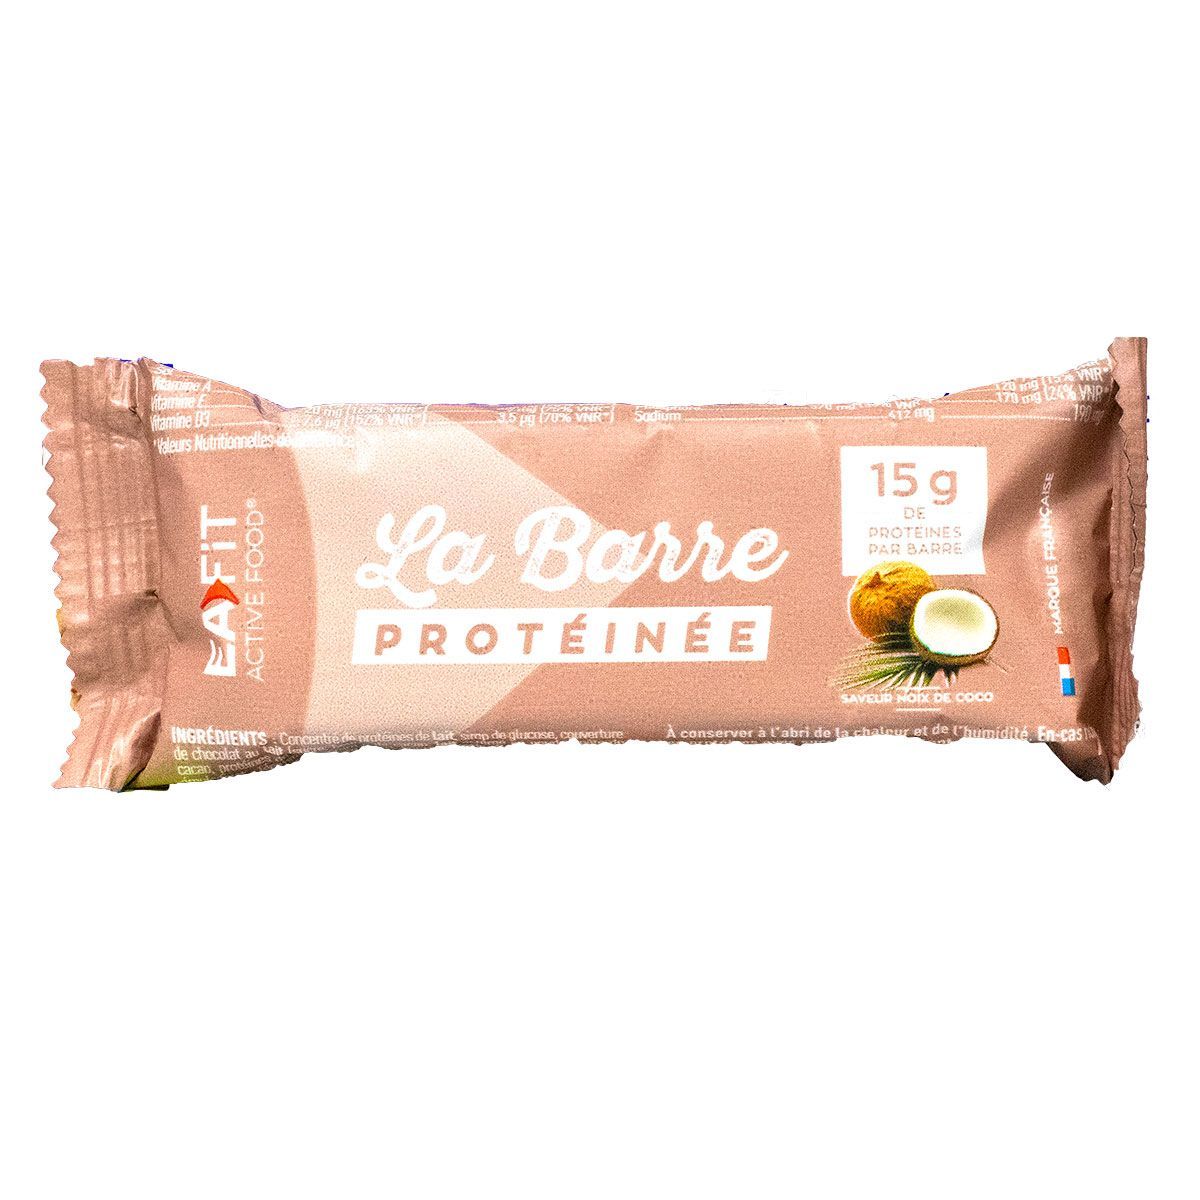 MODIFAST PROTEIN SHAPE BARRE COCO 6X - Parapharmacie Henry